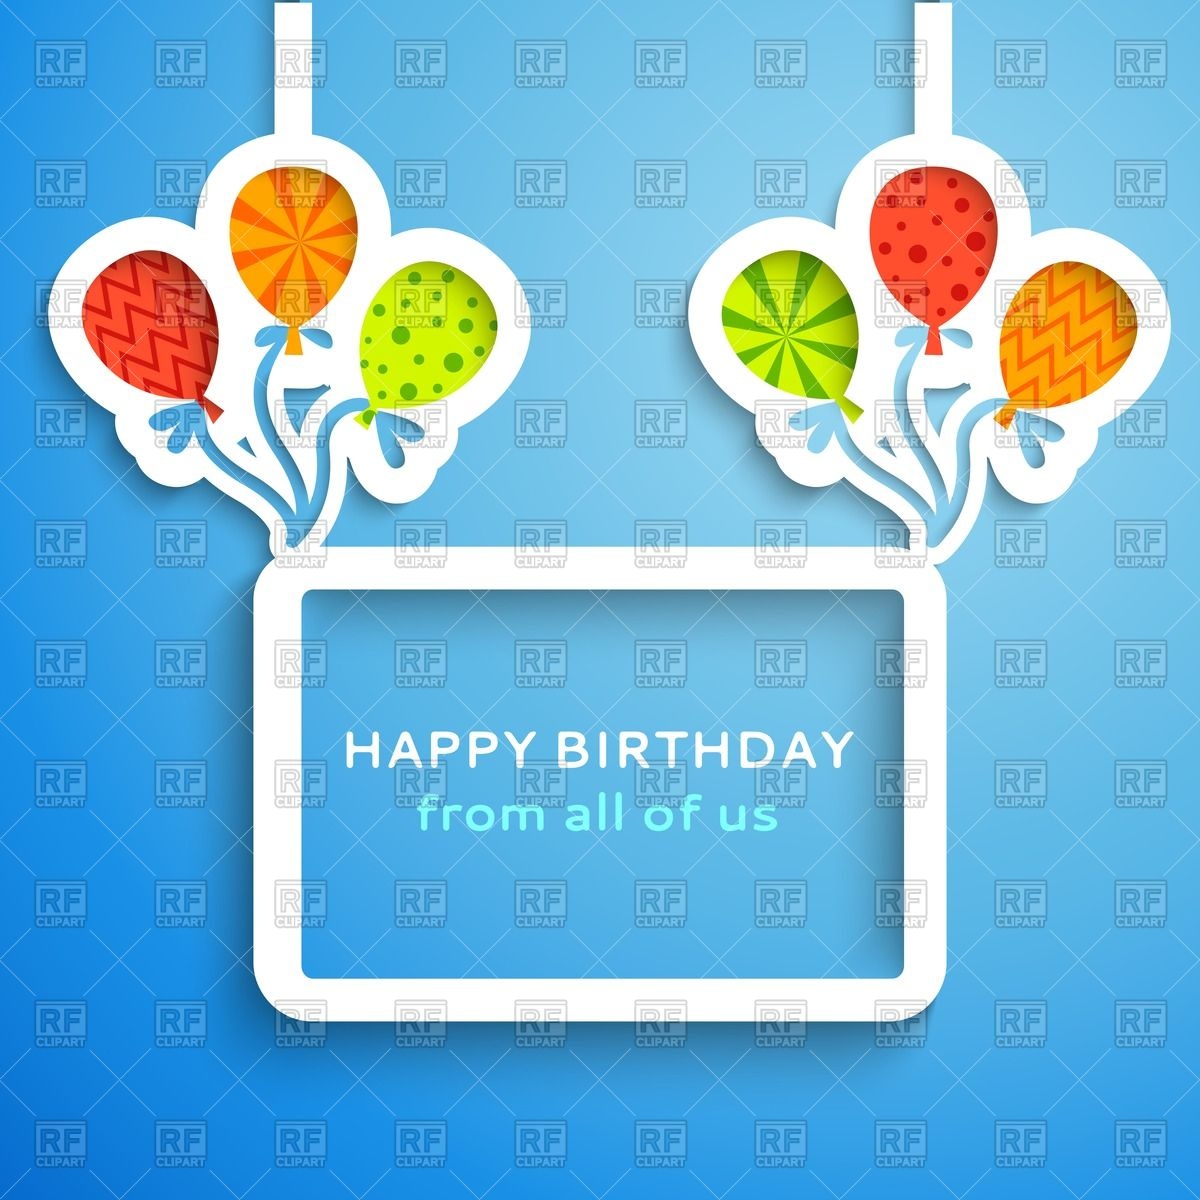 Happy Birthday   Colorful Applique Paper Greeting Card With Balloons